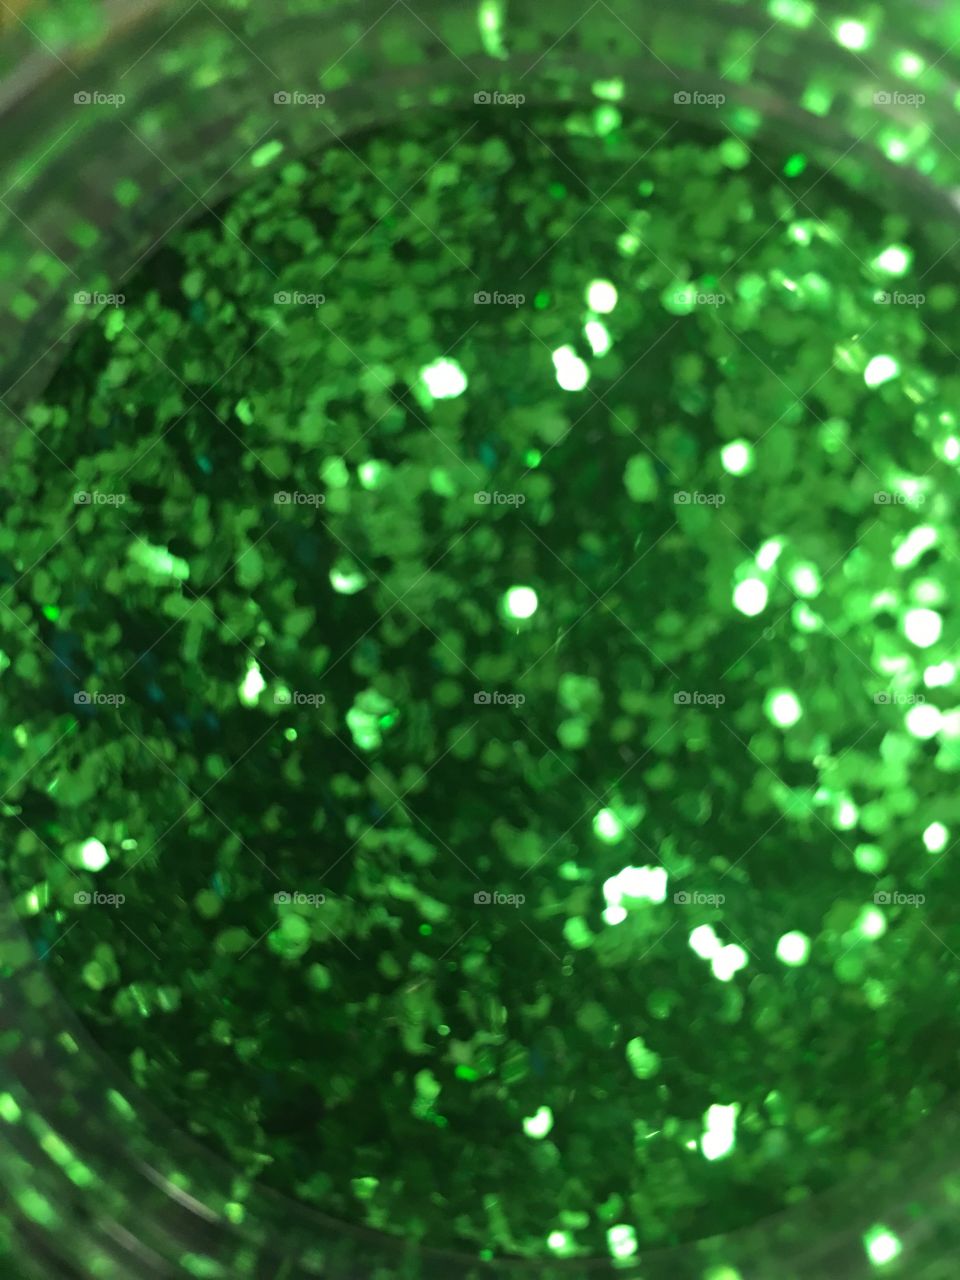 Looking into a jar of green glitter.  